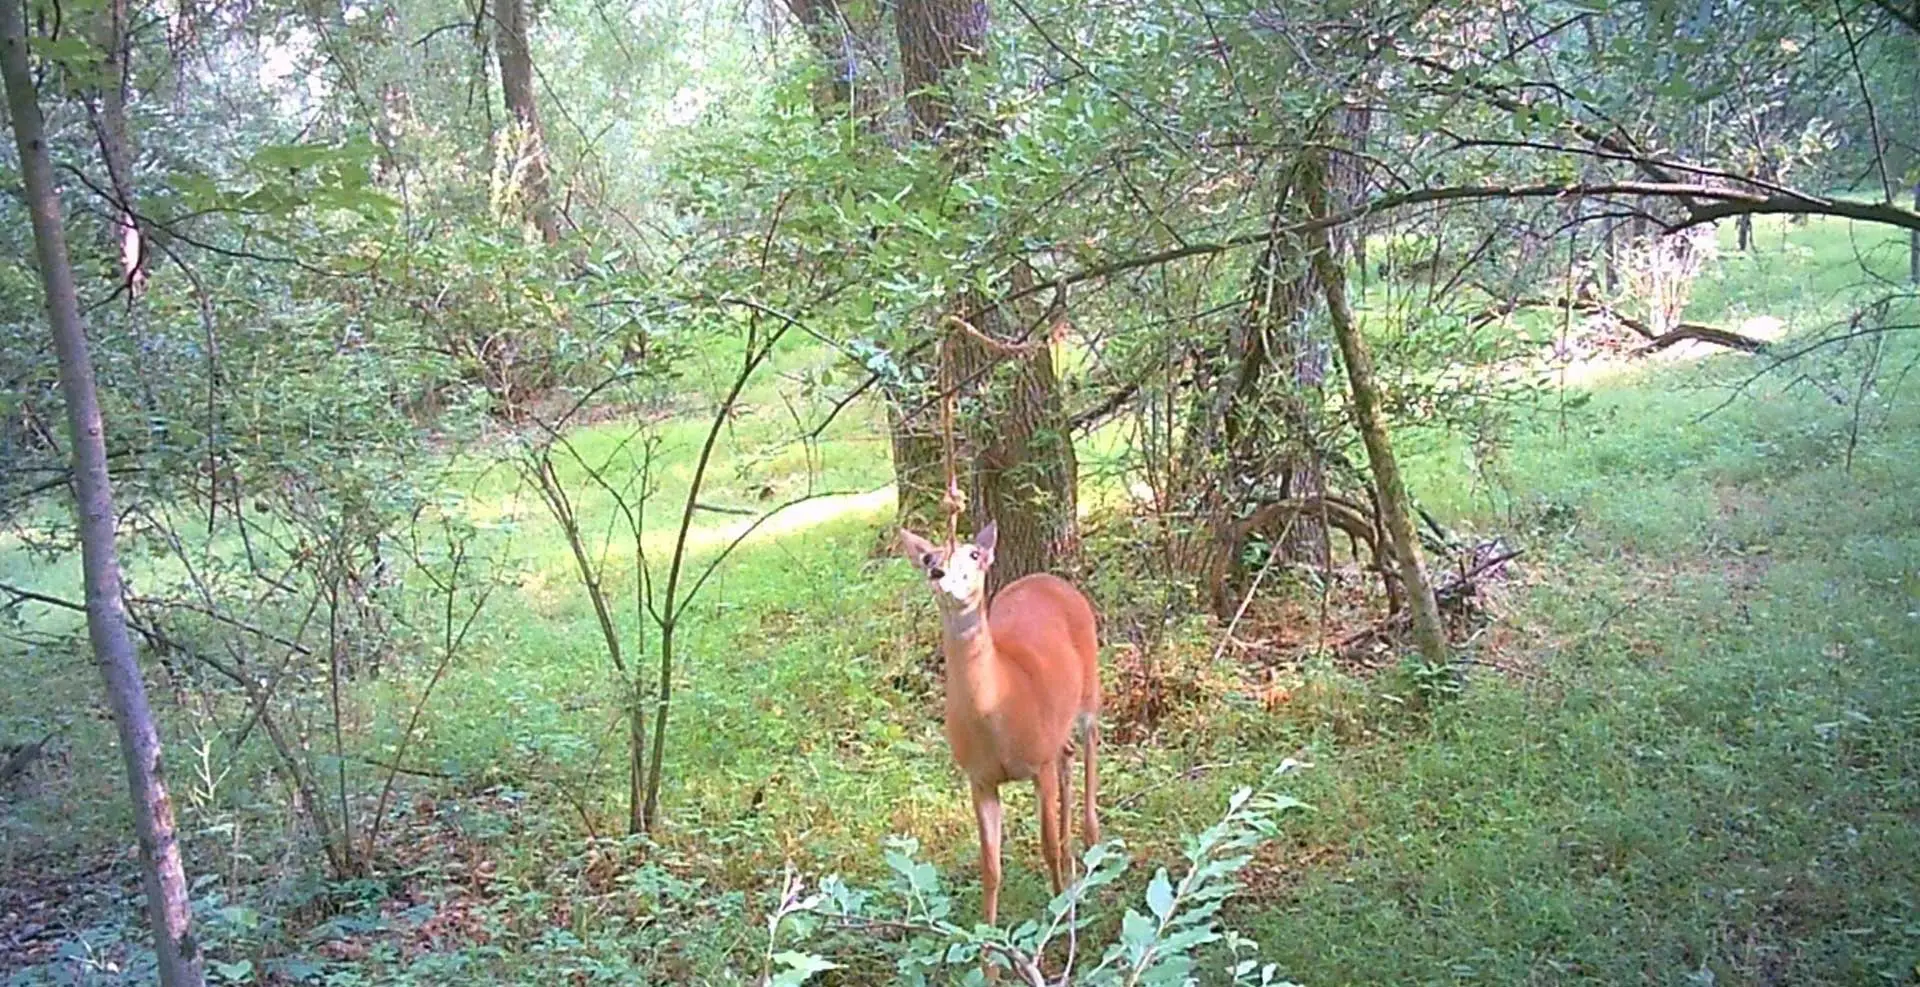 A deer standing in the middle of a forest.